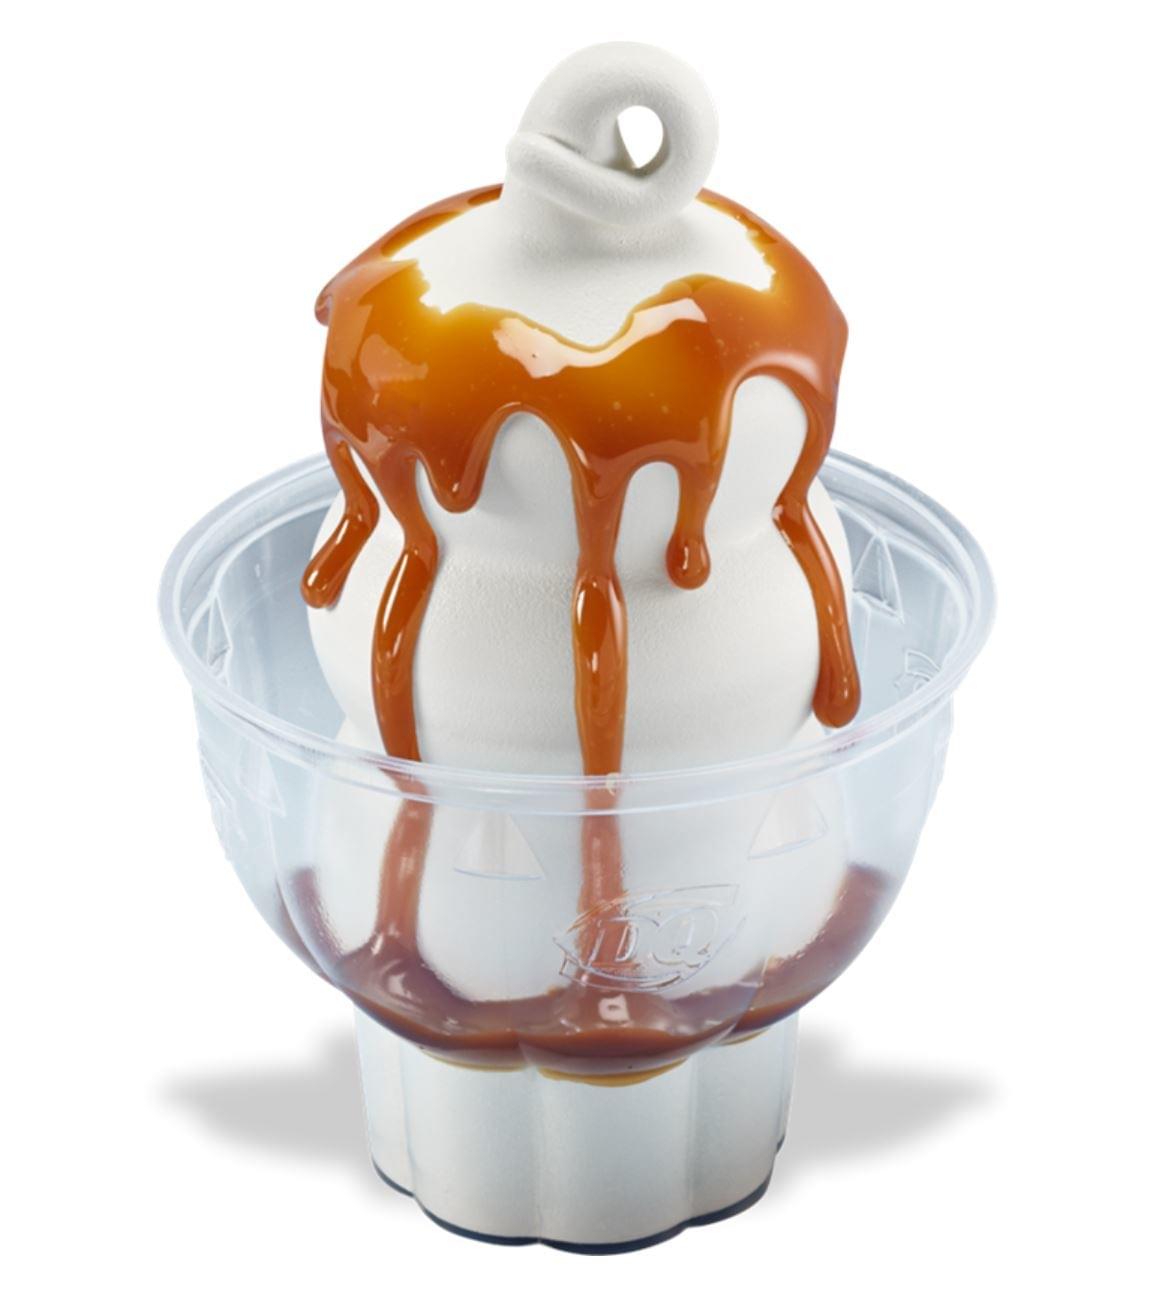 Dairy Queen Caramel Sundae Nutrition Facts